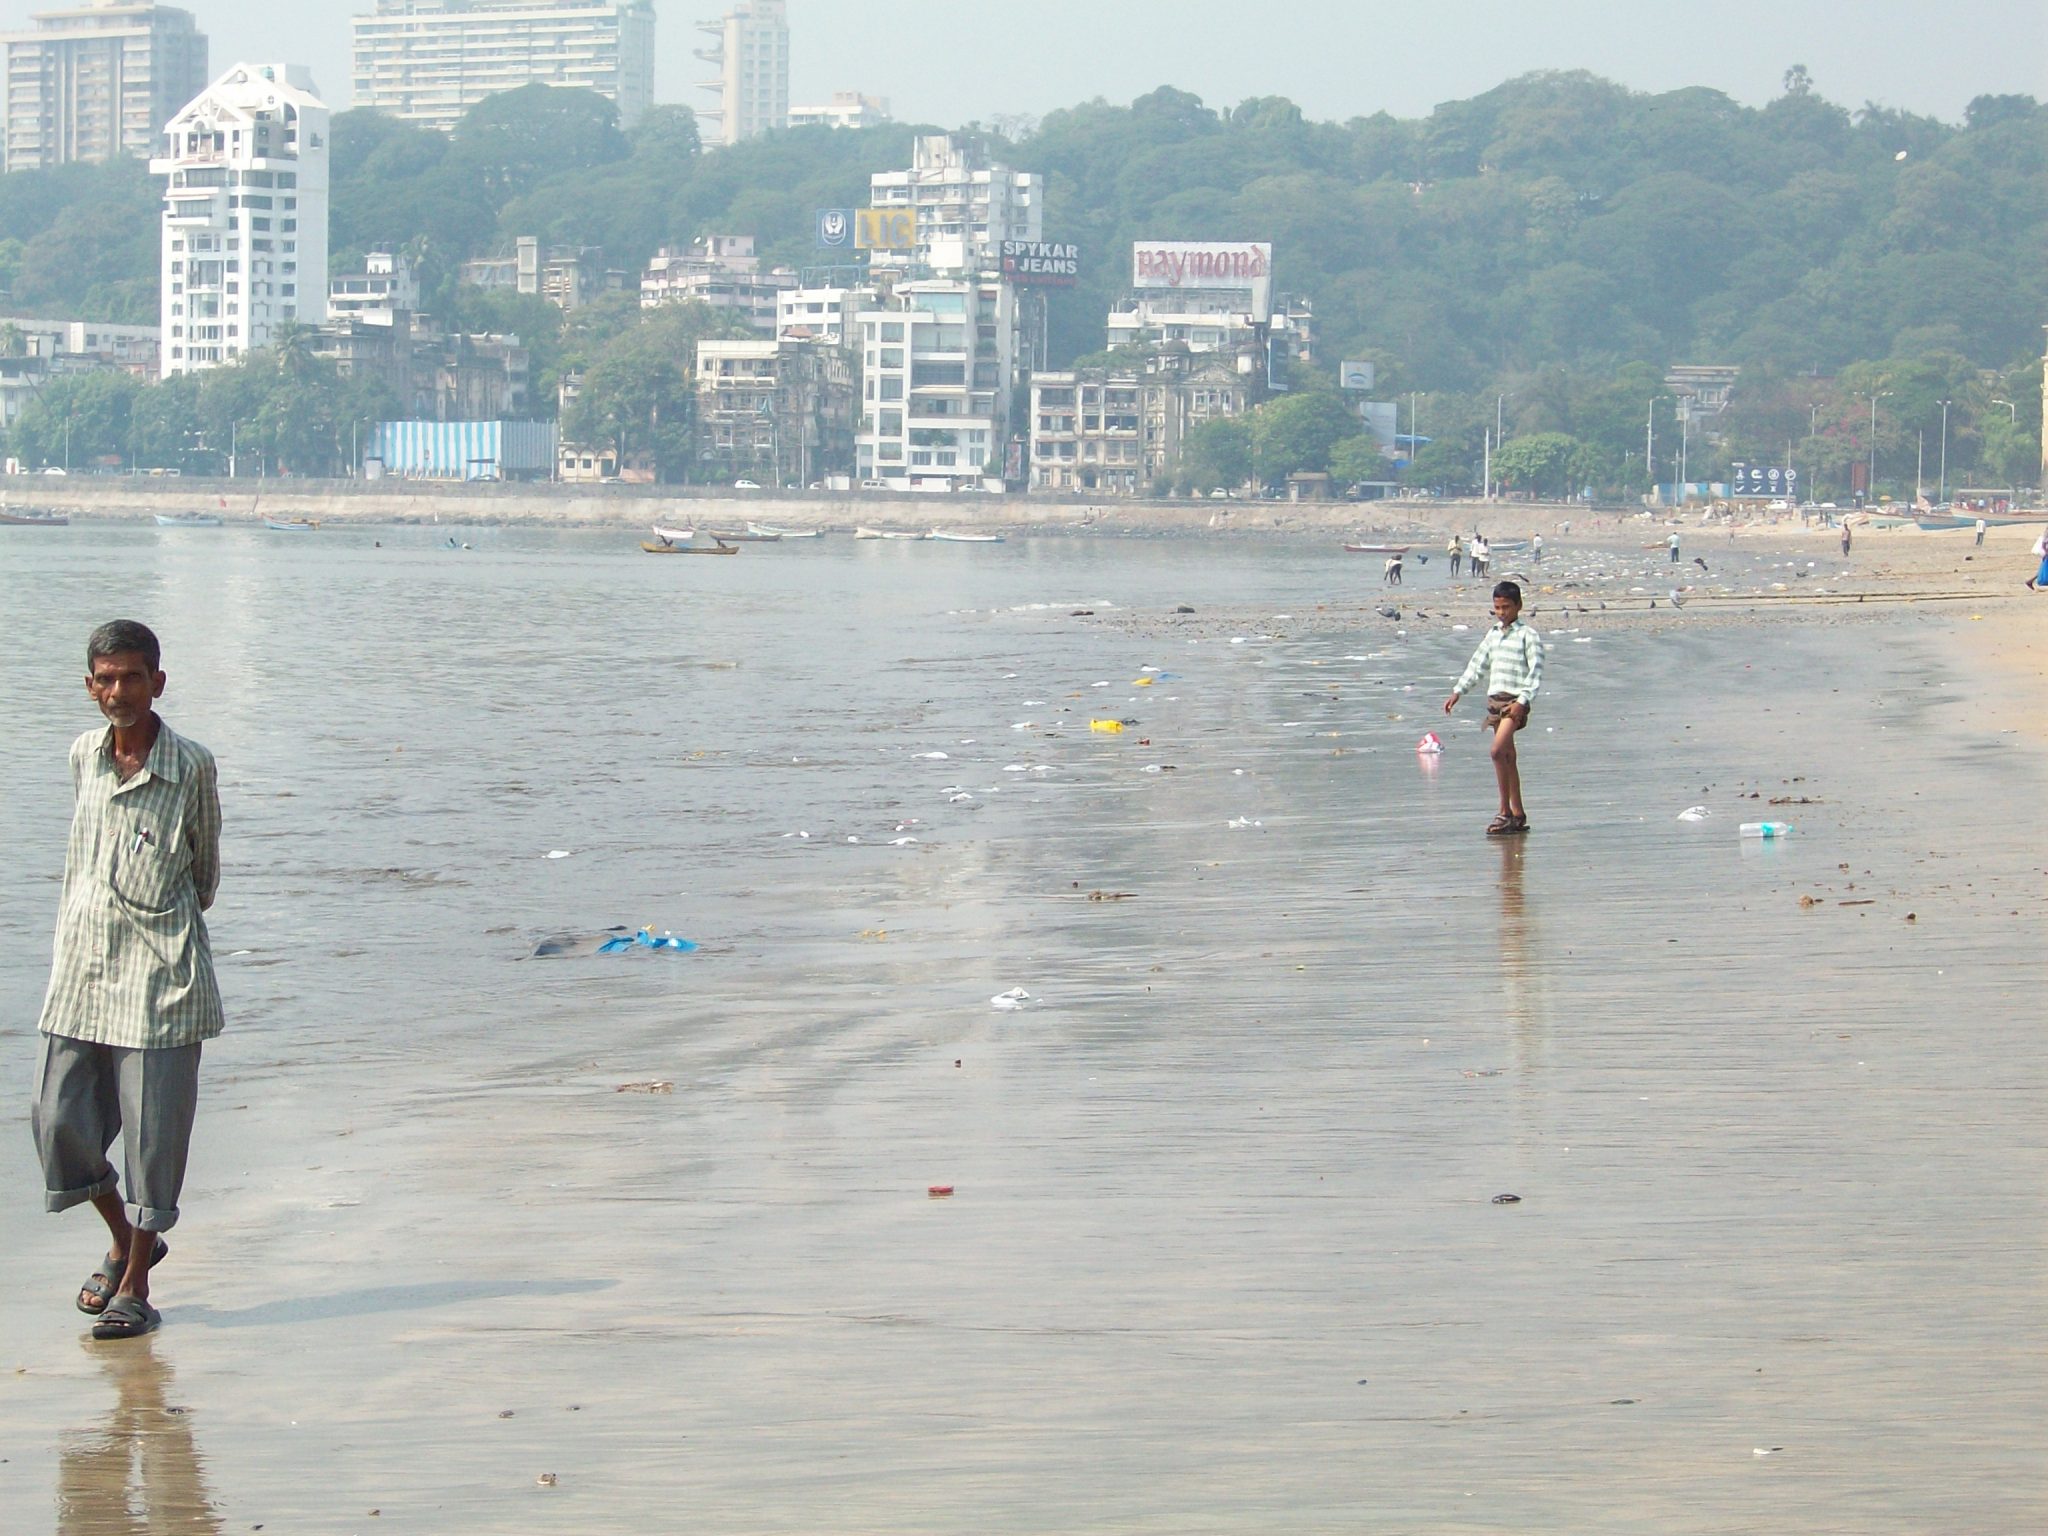 Mumbai Beach - The Average Percent Of Income Donated To Charity Can Improve